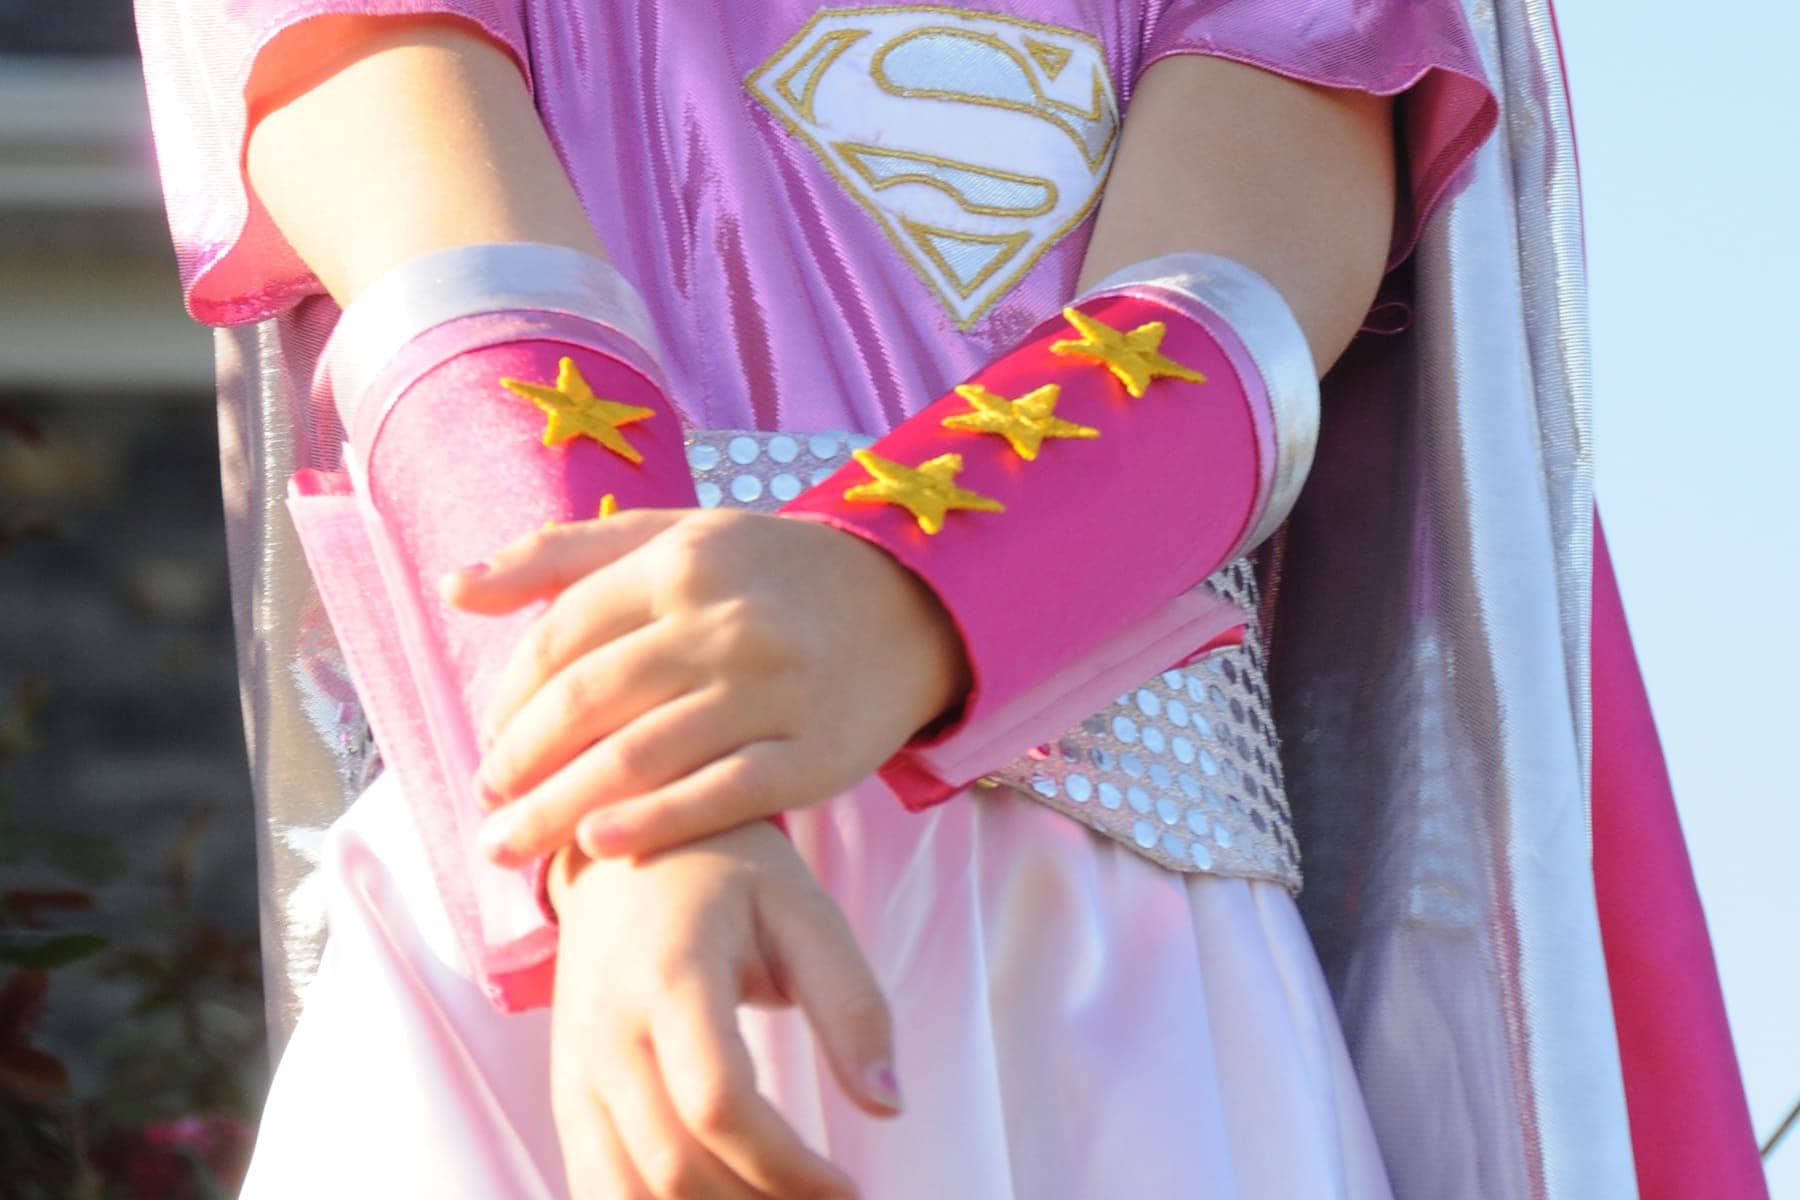 How to Make Superhero Cuffs for a Kids Halloween Costume